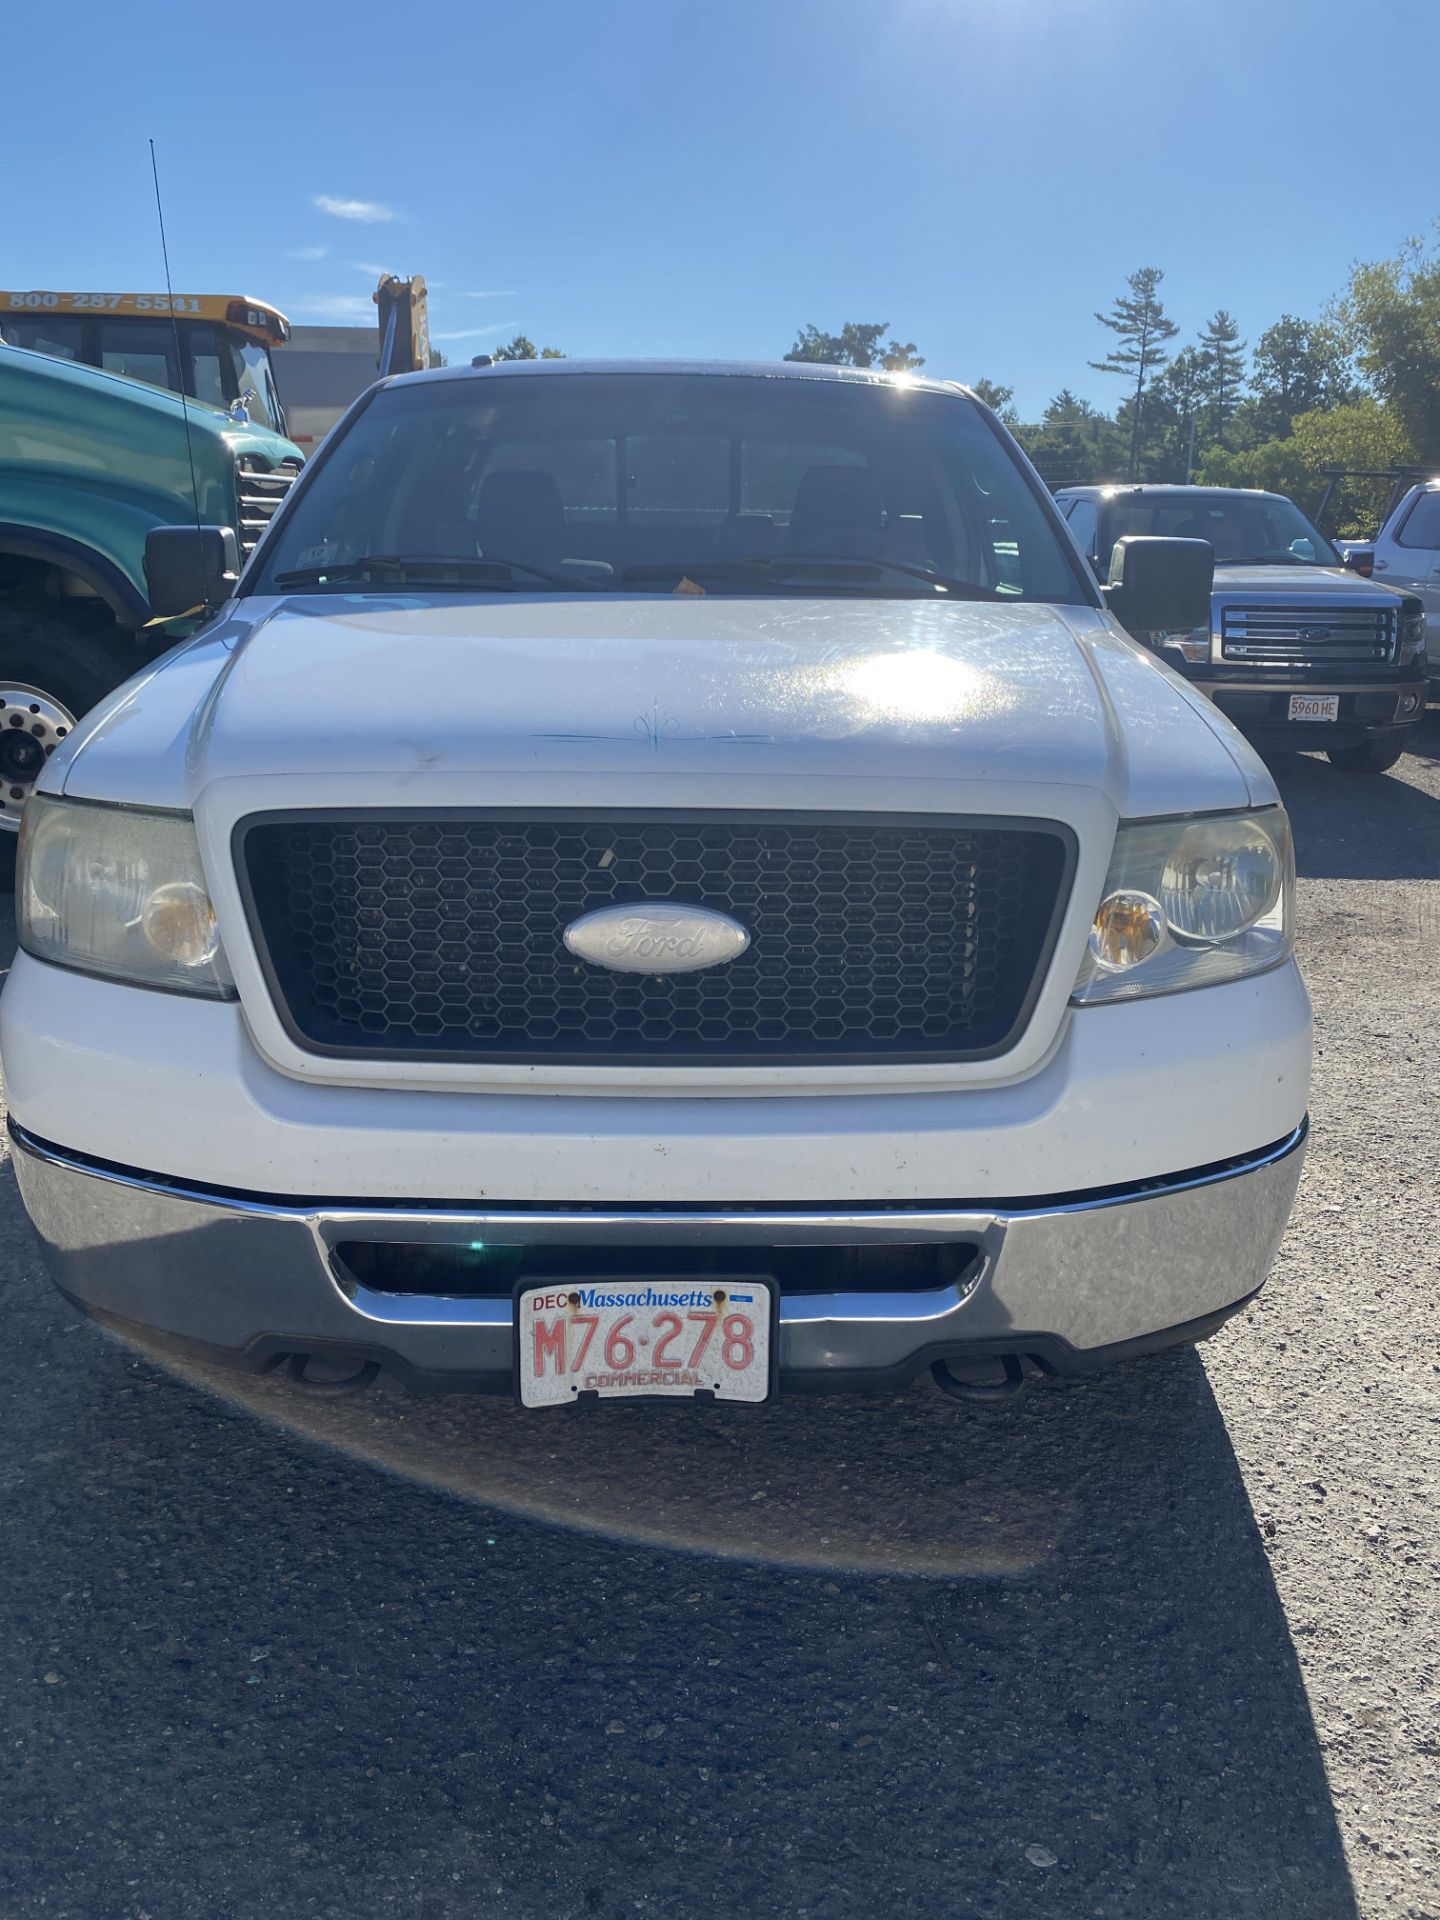 2006 Ford F150 XLT 5.4 Triton Extended Cab Pick Up Truck VIN 1FTPX14536NA70786, 220,670 Miles, - Image 2 of 4